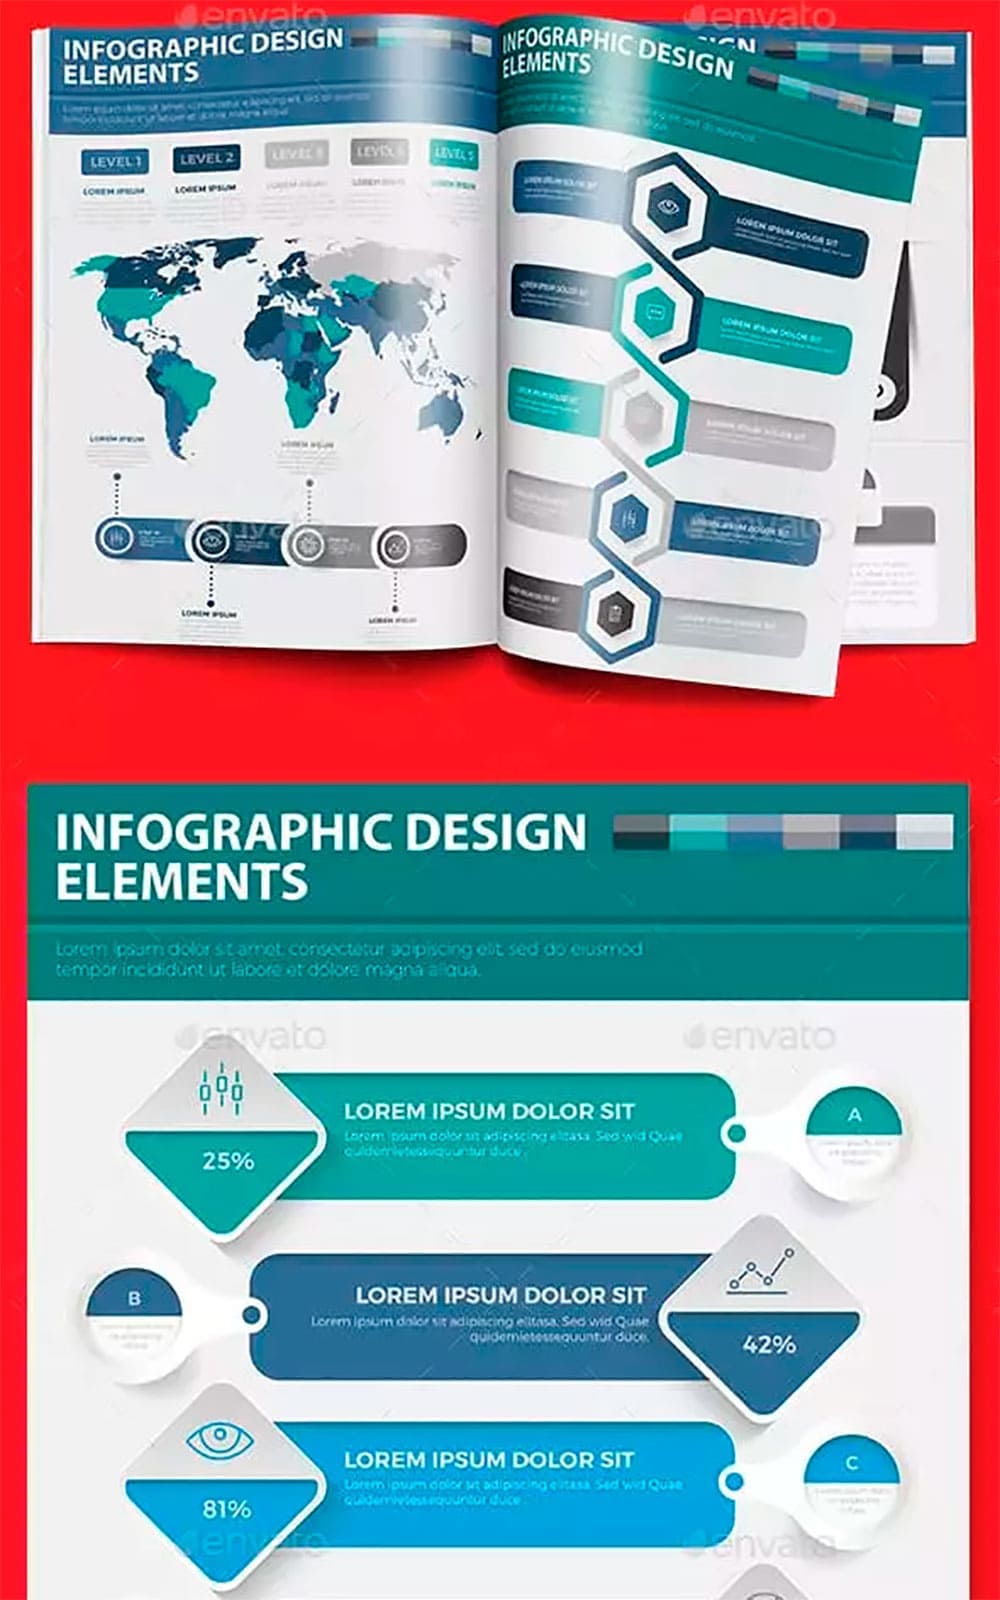 Infographic elements 335, picture for pinterest.